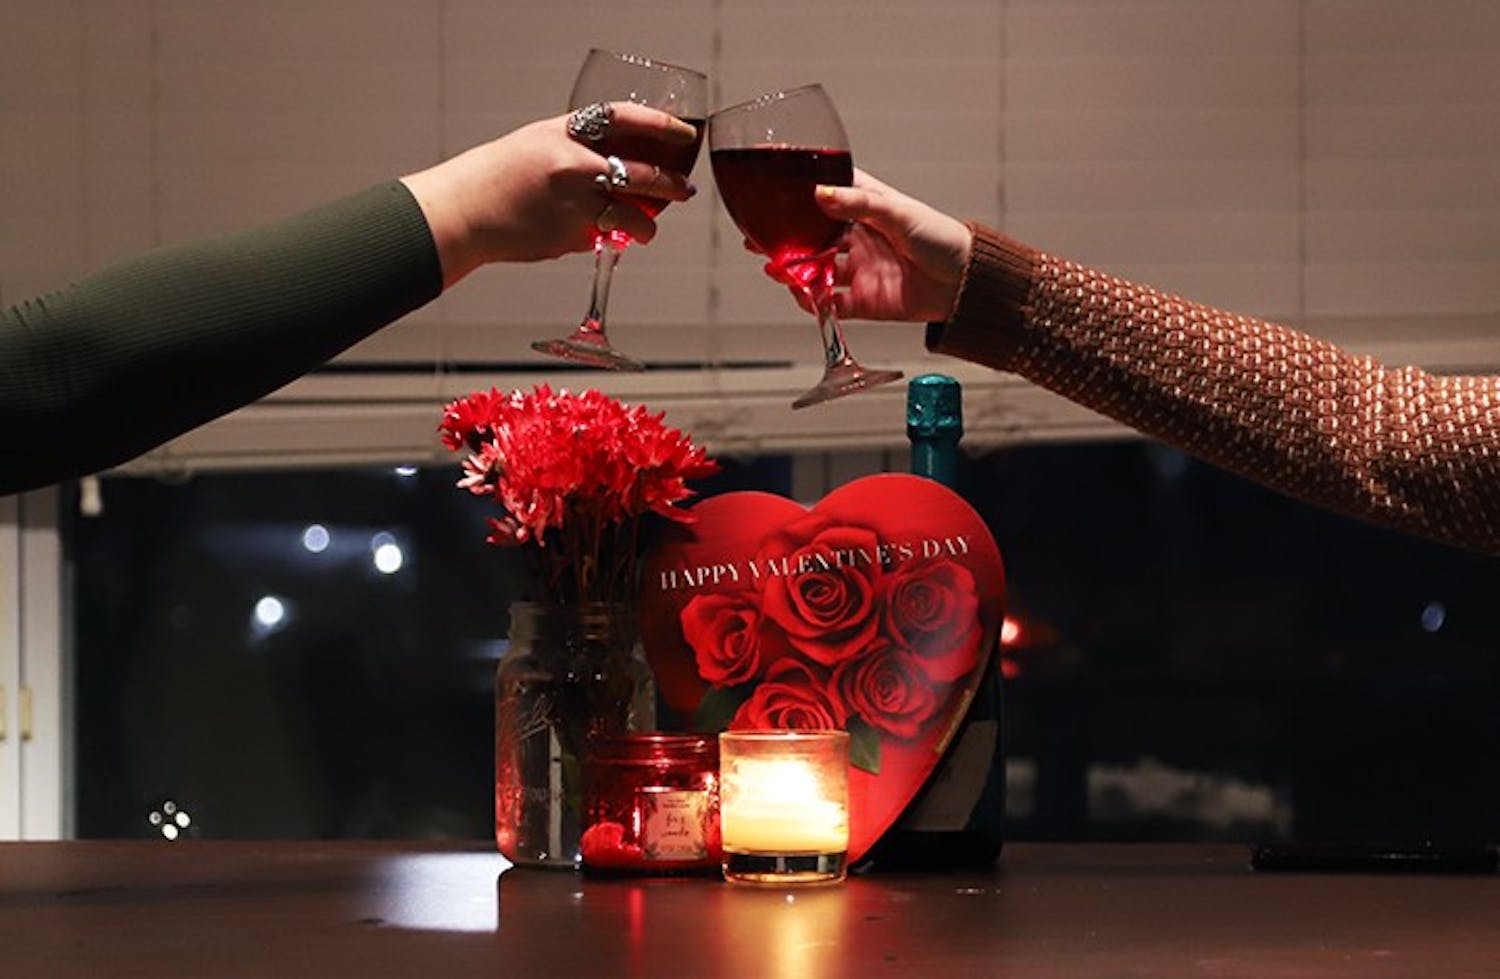 Two girls clink their glasses together with Valentine's Day paraphernalia behind them.